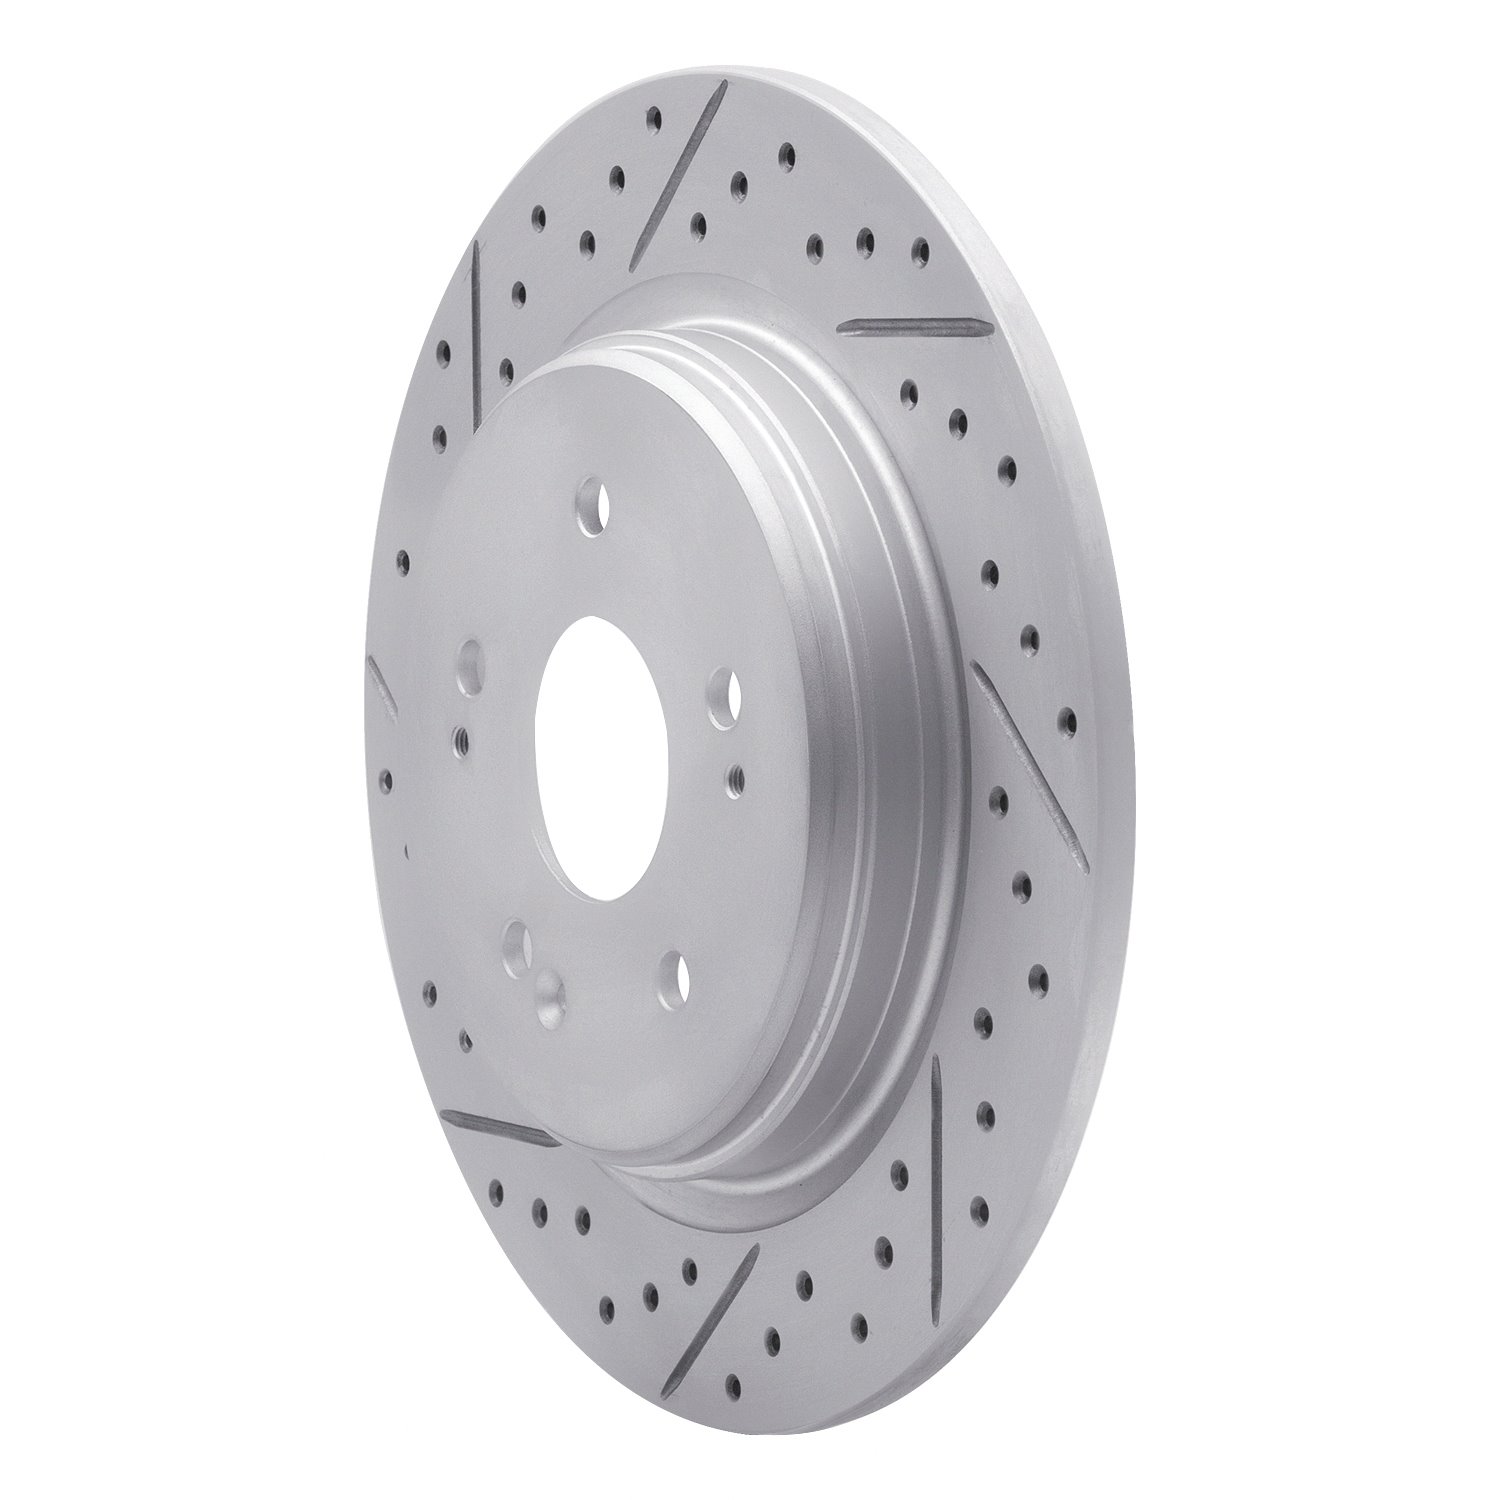 830-58029L Geoperformance Drilled/Slotted Brake Rotor, Fits Select Acura/Honda, Position: Rear Left